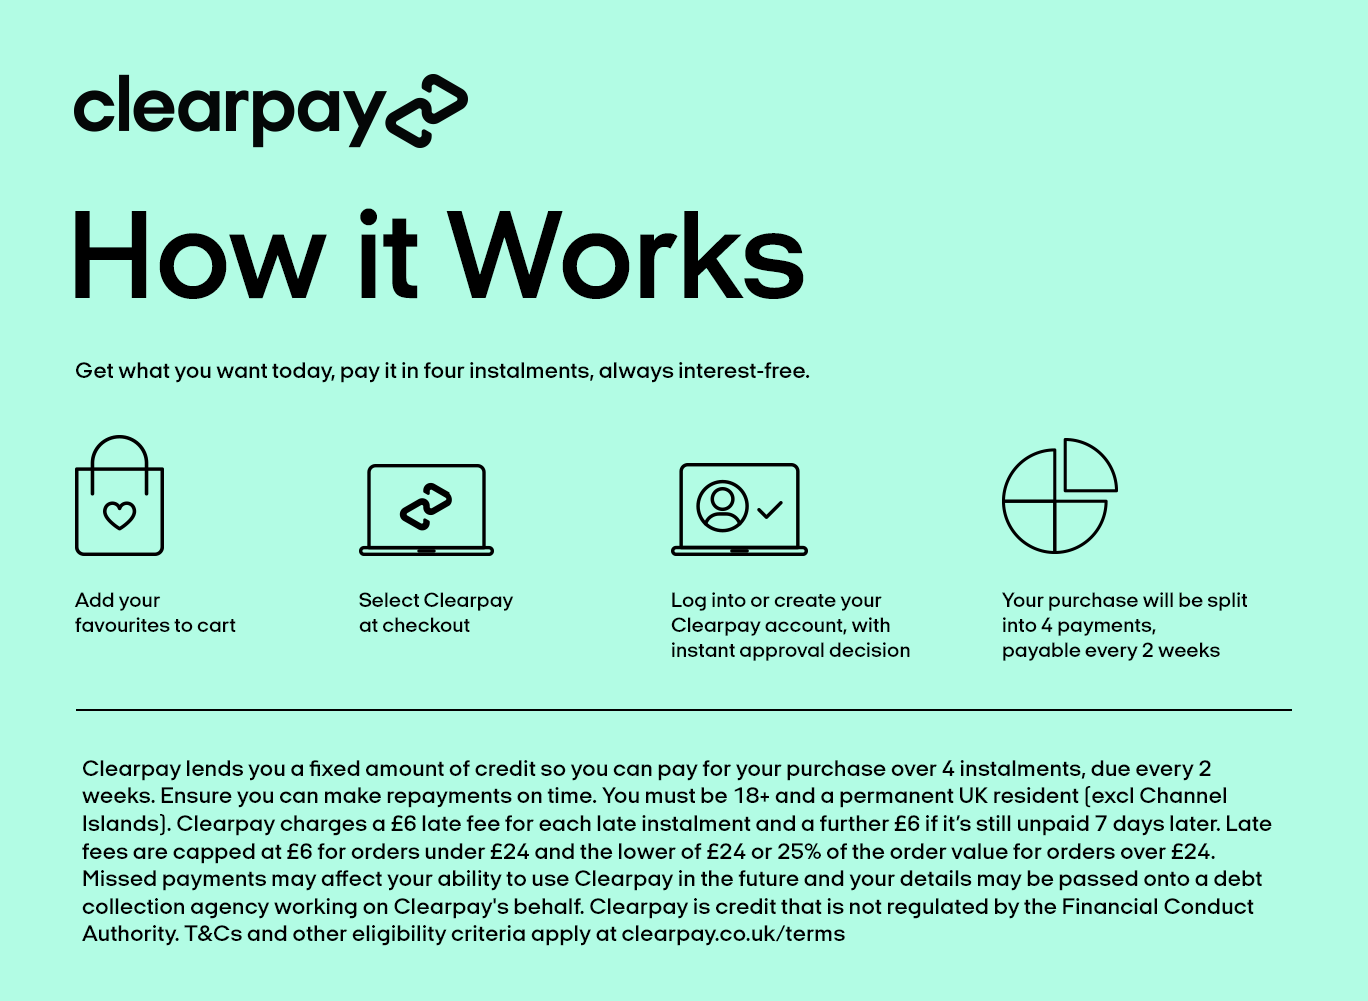 clearpay-how-it-works